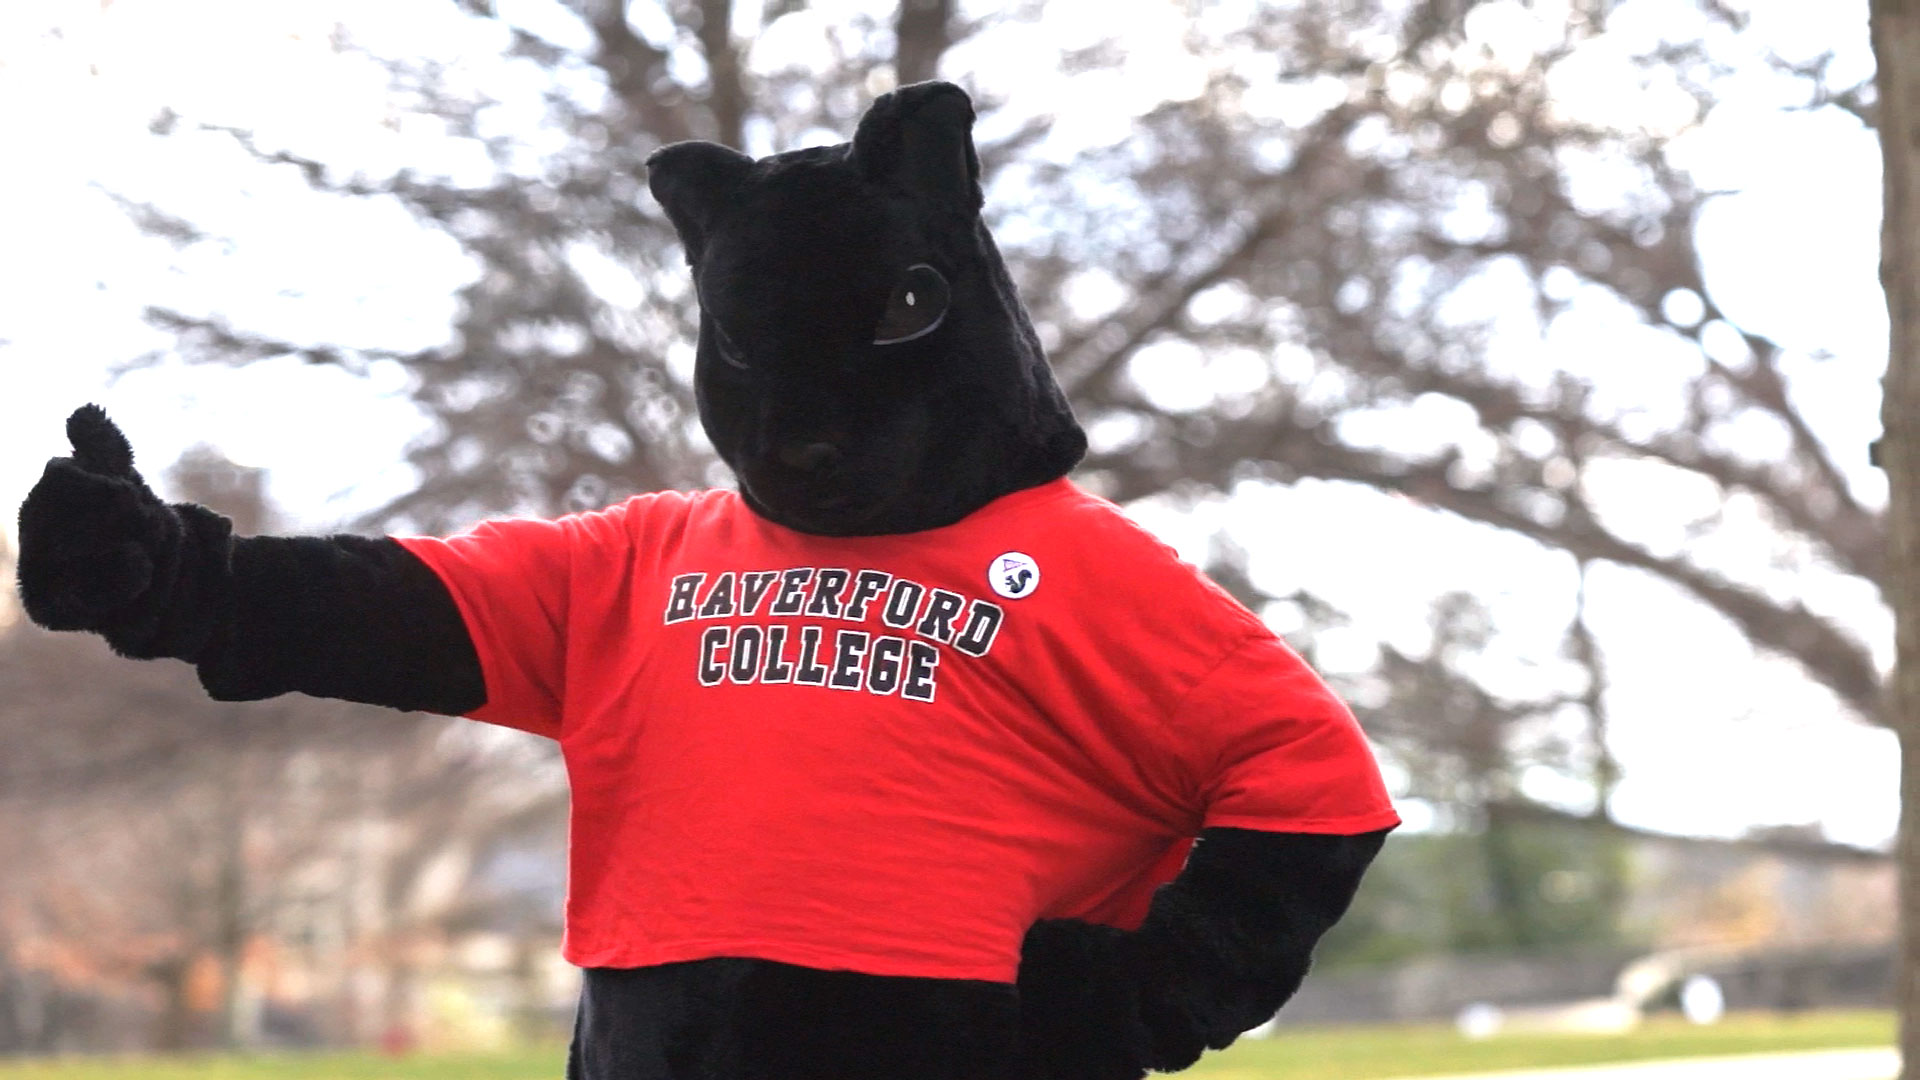 the black squirrel mascot giving a thumbs-up